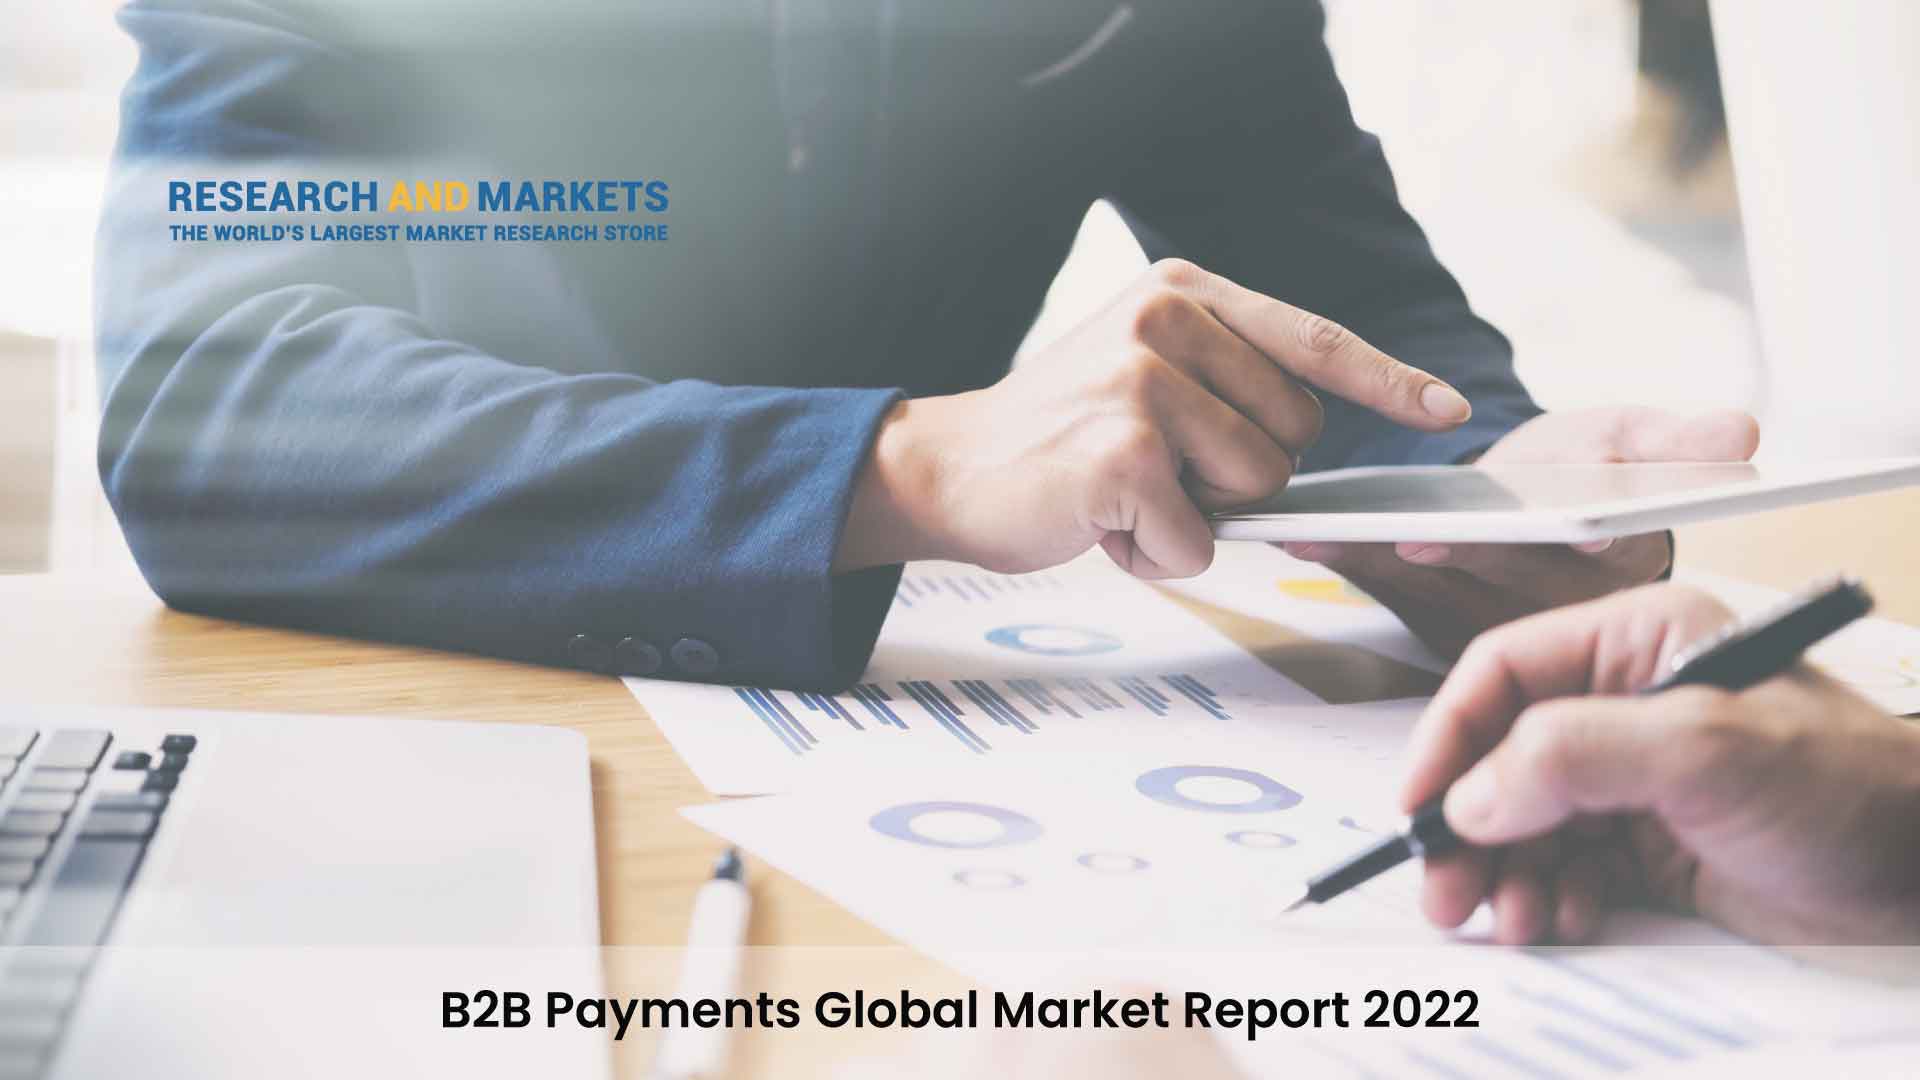 B2B Payments Global Market Report 2022: Featuring American Express, JPMorgan, Mastercard, PayPal, Stripe and More